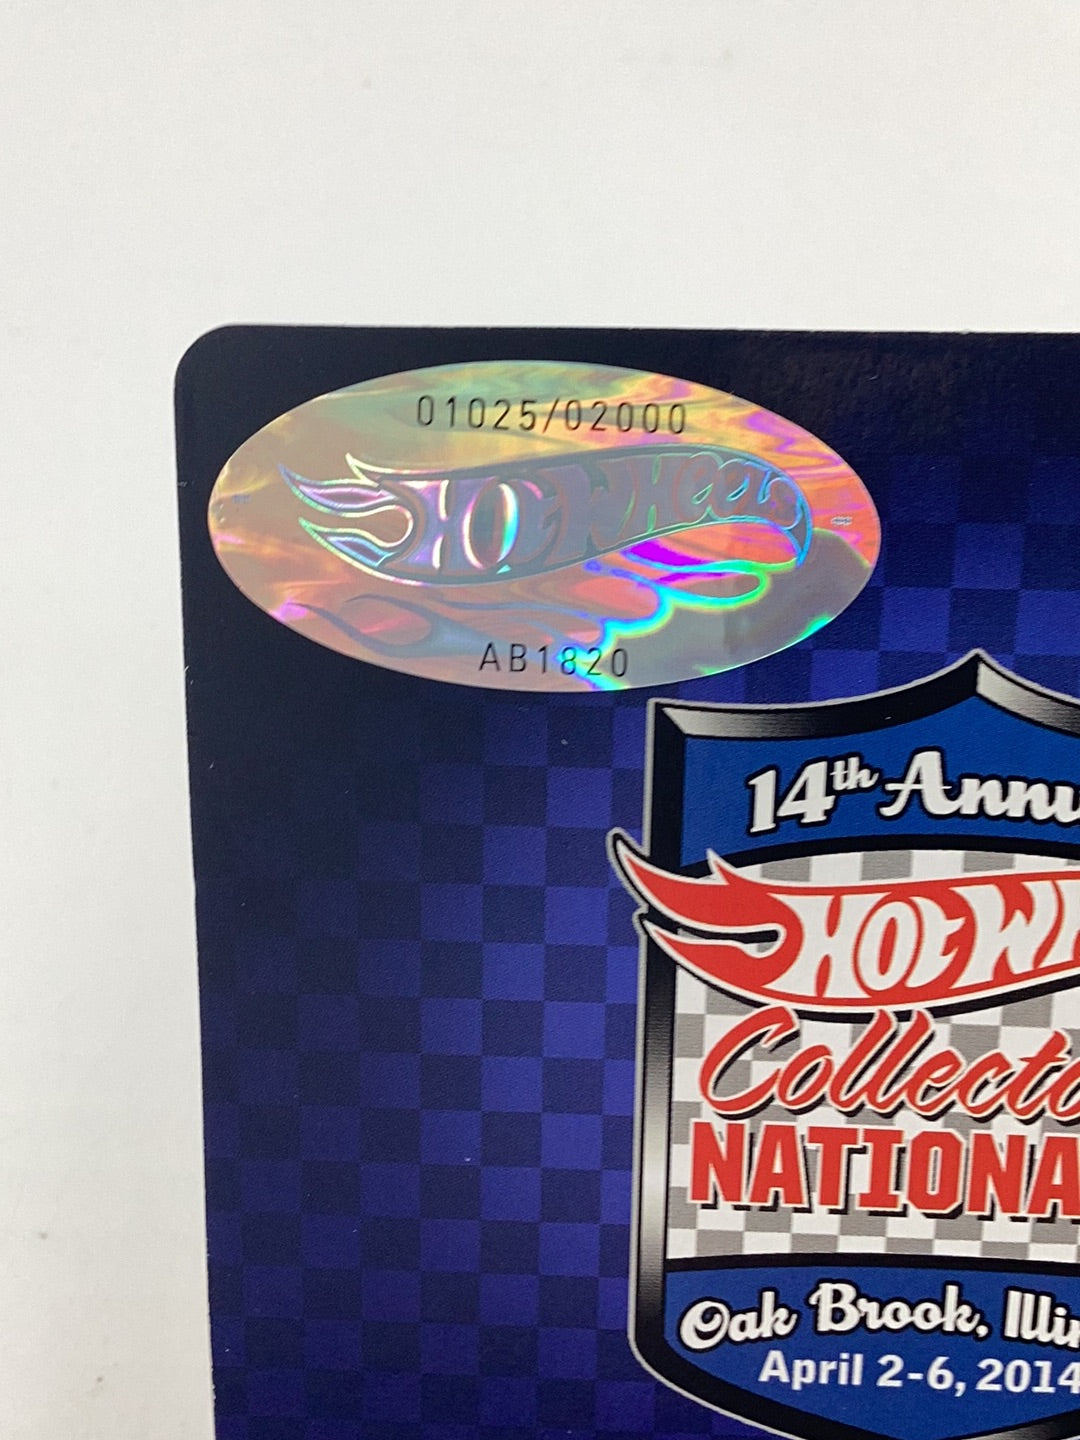 Hot Wheels 14th annual collectors nationals Rodger Dodger 1025/2000 with protector